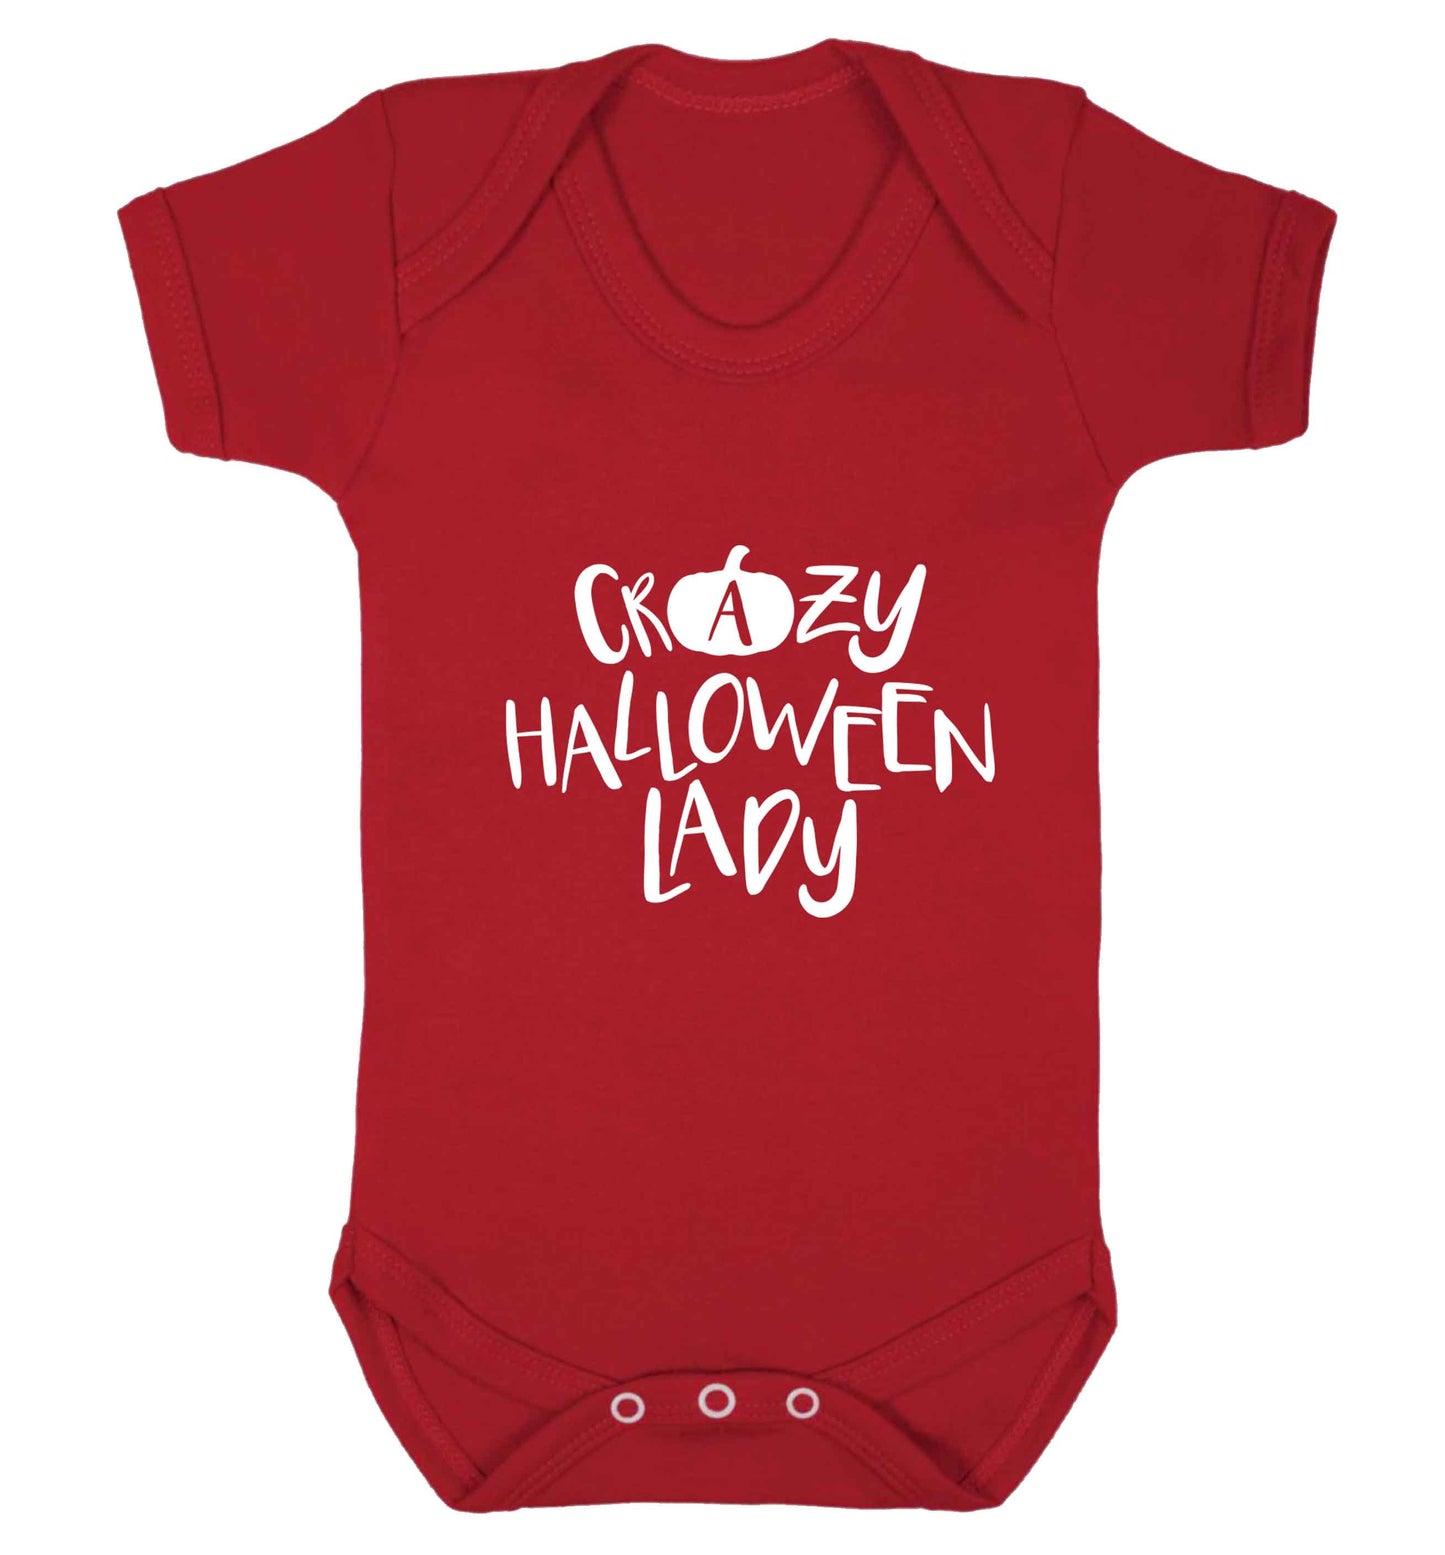 Crazy halloween lady baby vest red 18-24 months